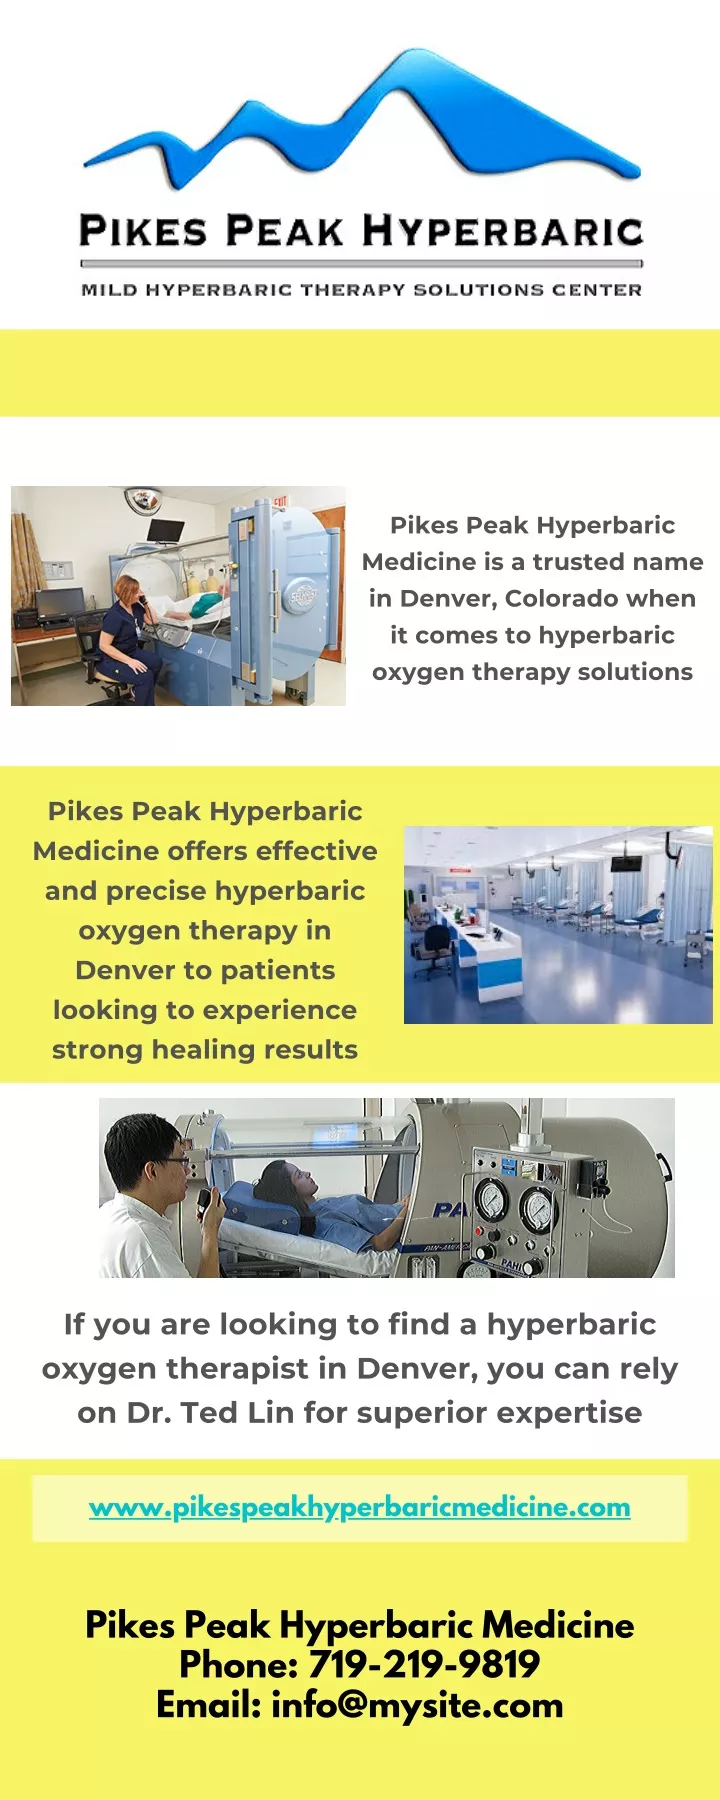 pikes peak hyperbaric medicine is a trusted name